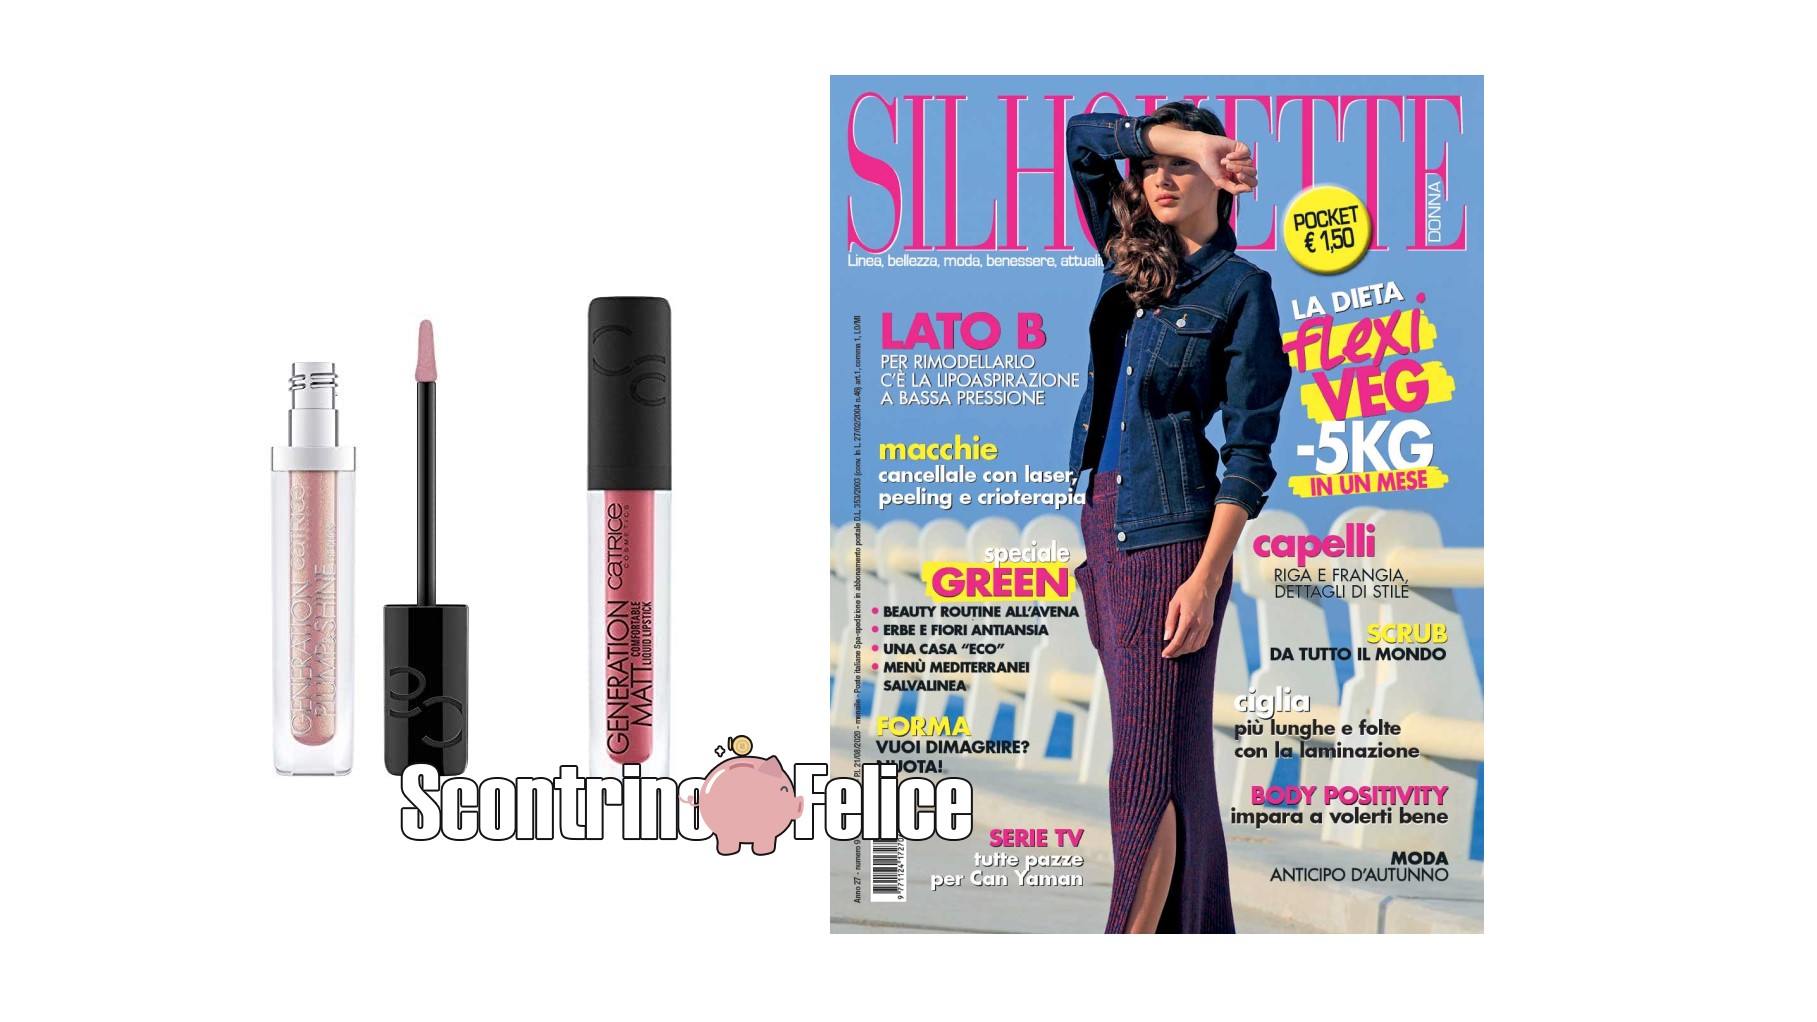 Silhouette Pocket 9 rossetto Lipgloss Catrice